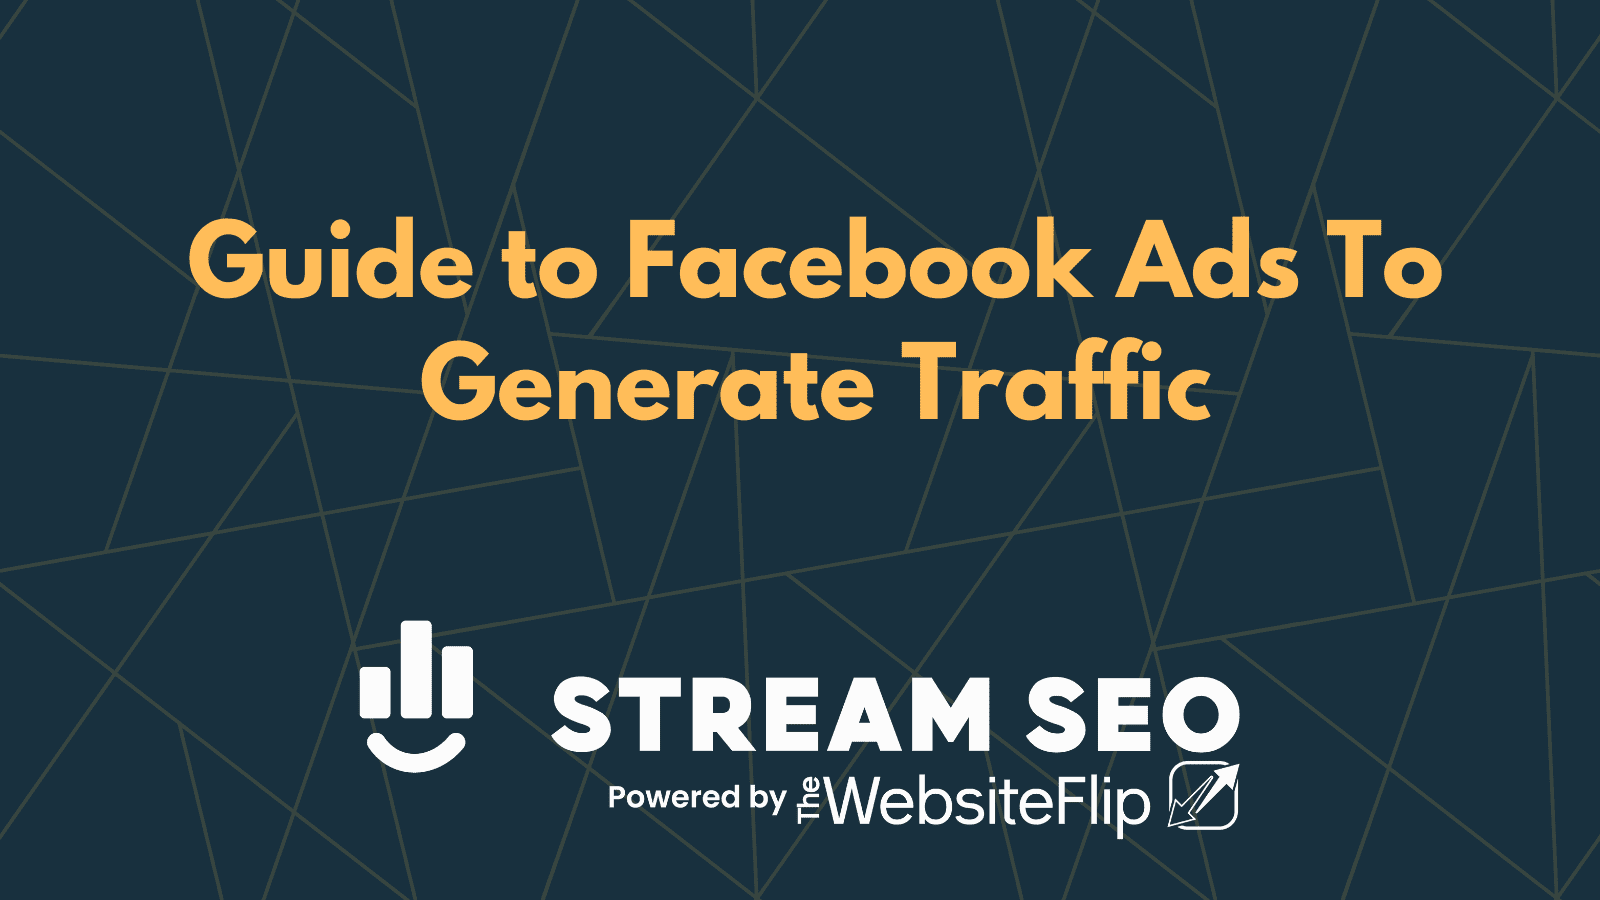 Guide to Facebook Ads To Generate Traffic